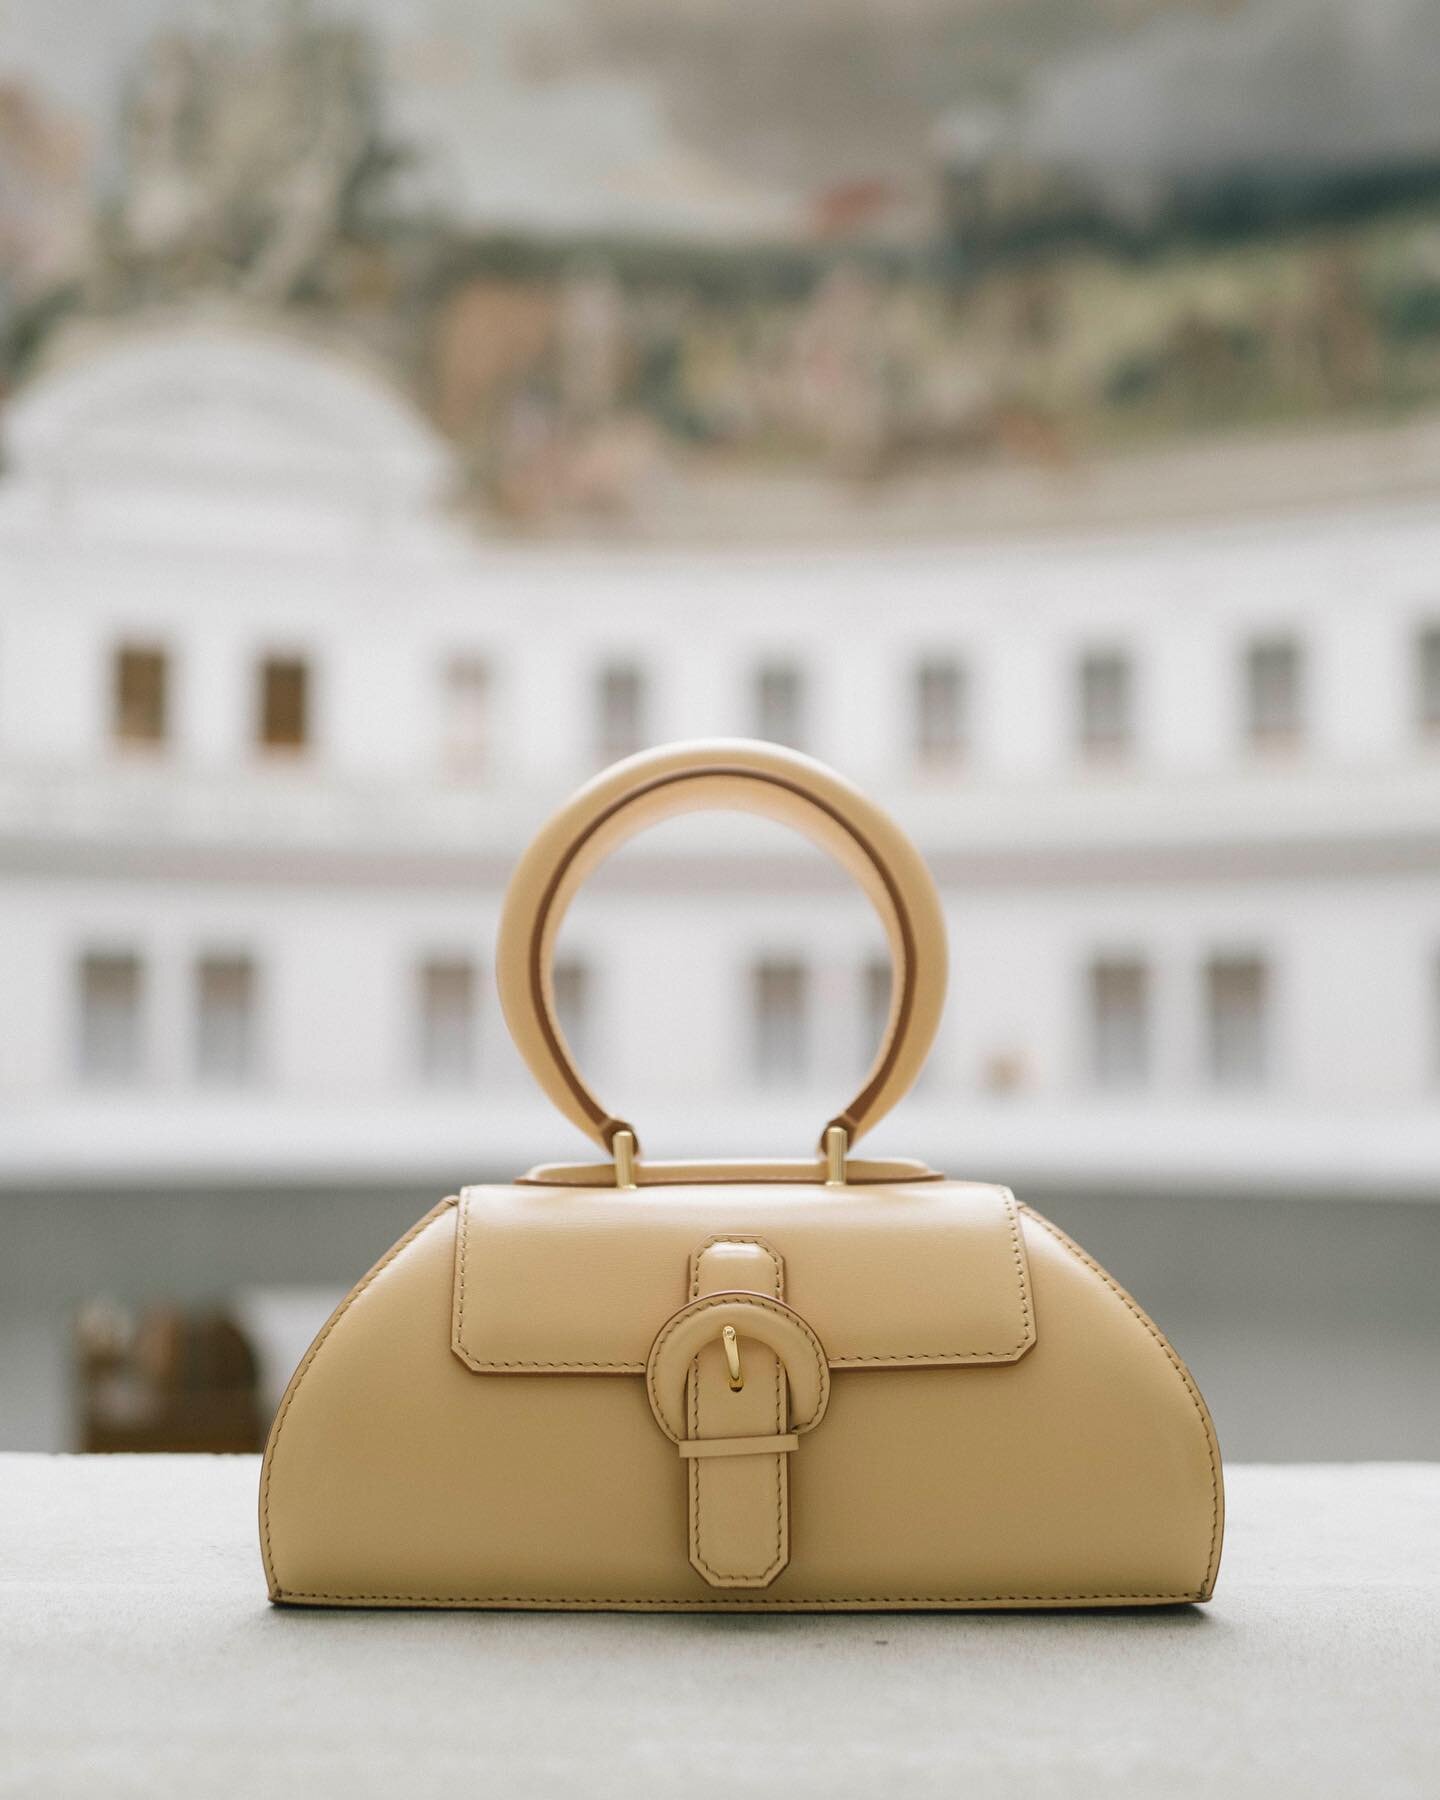 Carry U&mdash;a fusion of opulence and exclusivity. Our bespoke metal ring and handcrafted A-grade Napa leather make a bold statement. #handBag #cochains